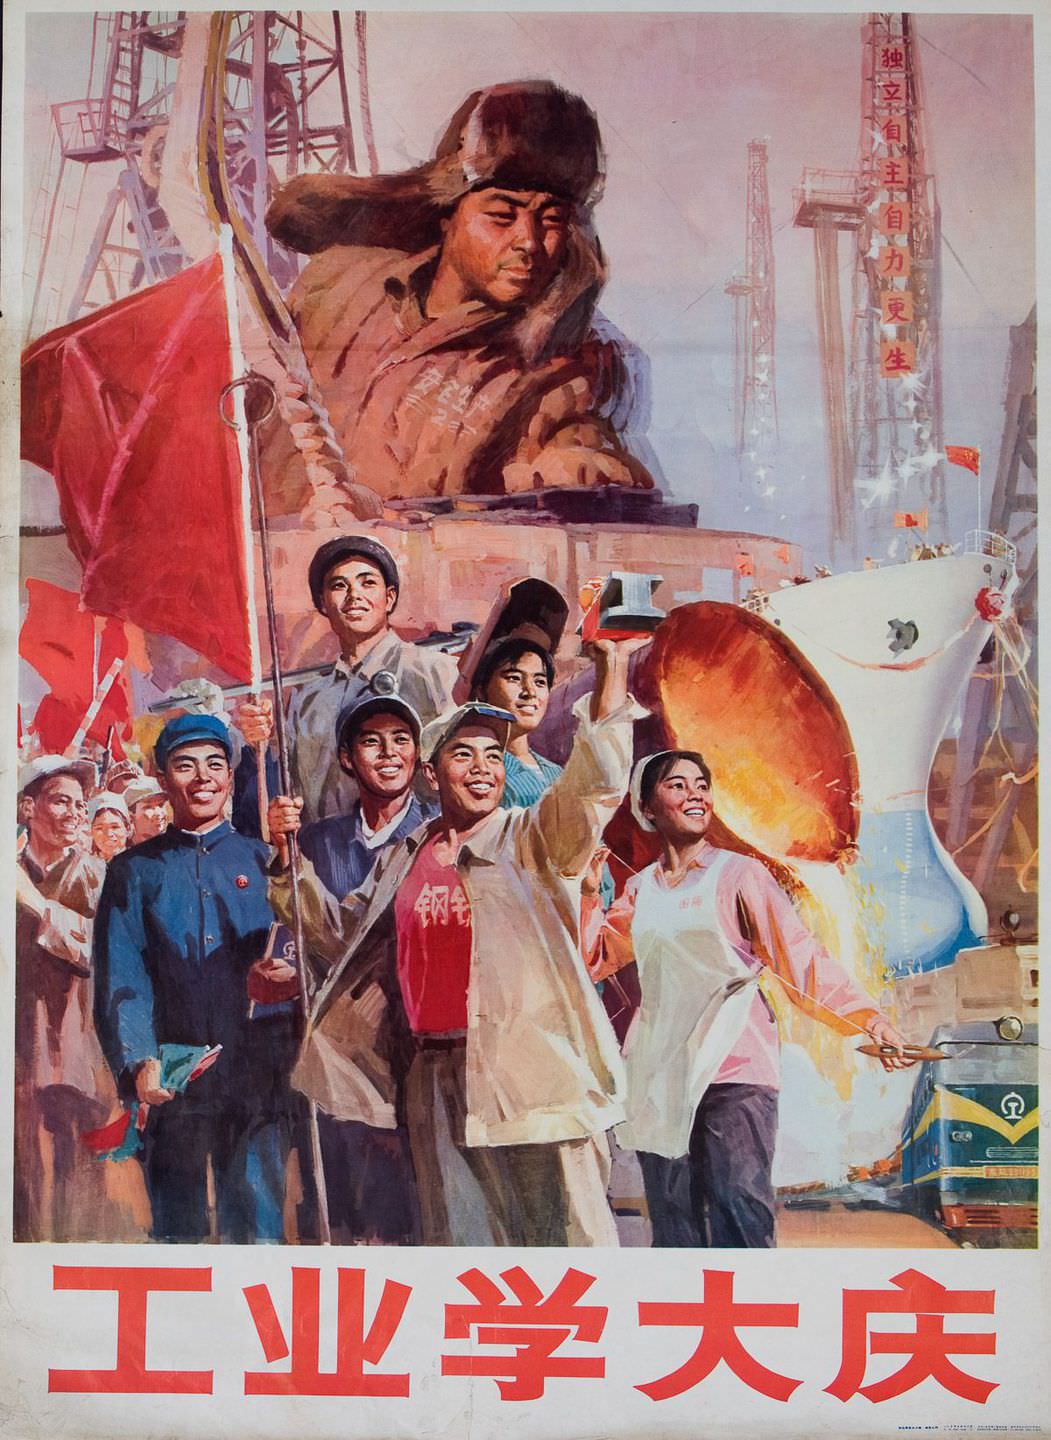 Shipyard Industry Workers Learn From Da Qing,1976